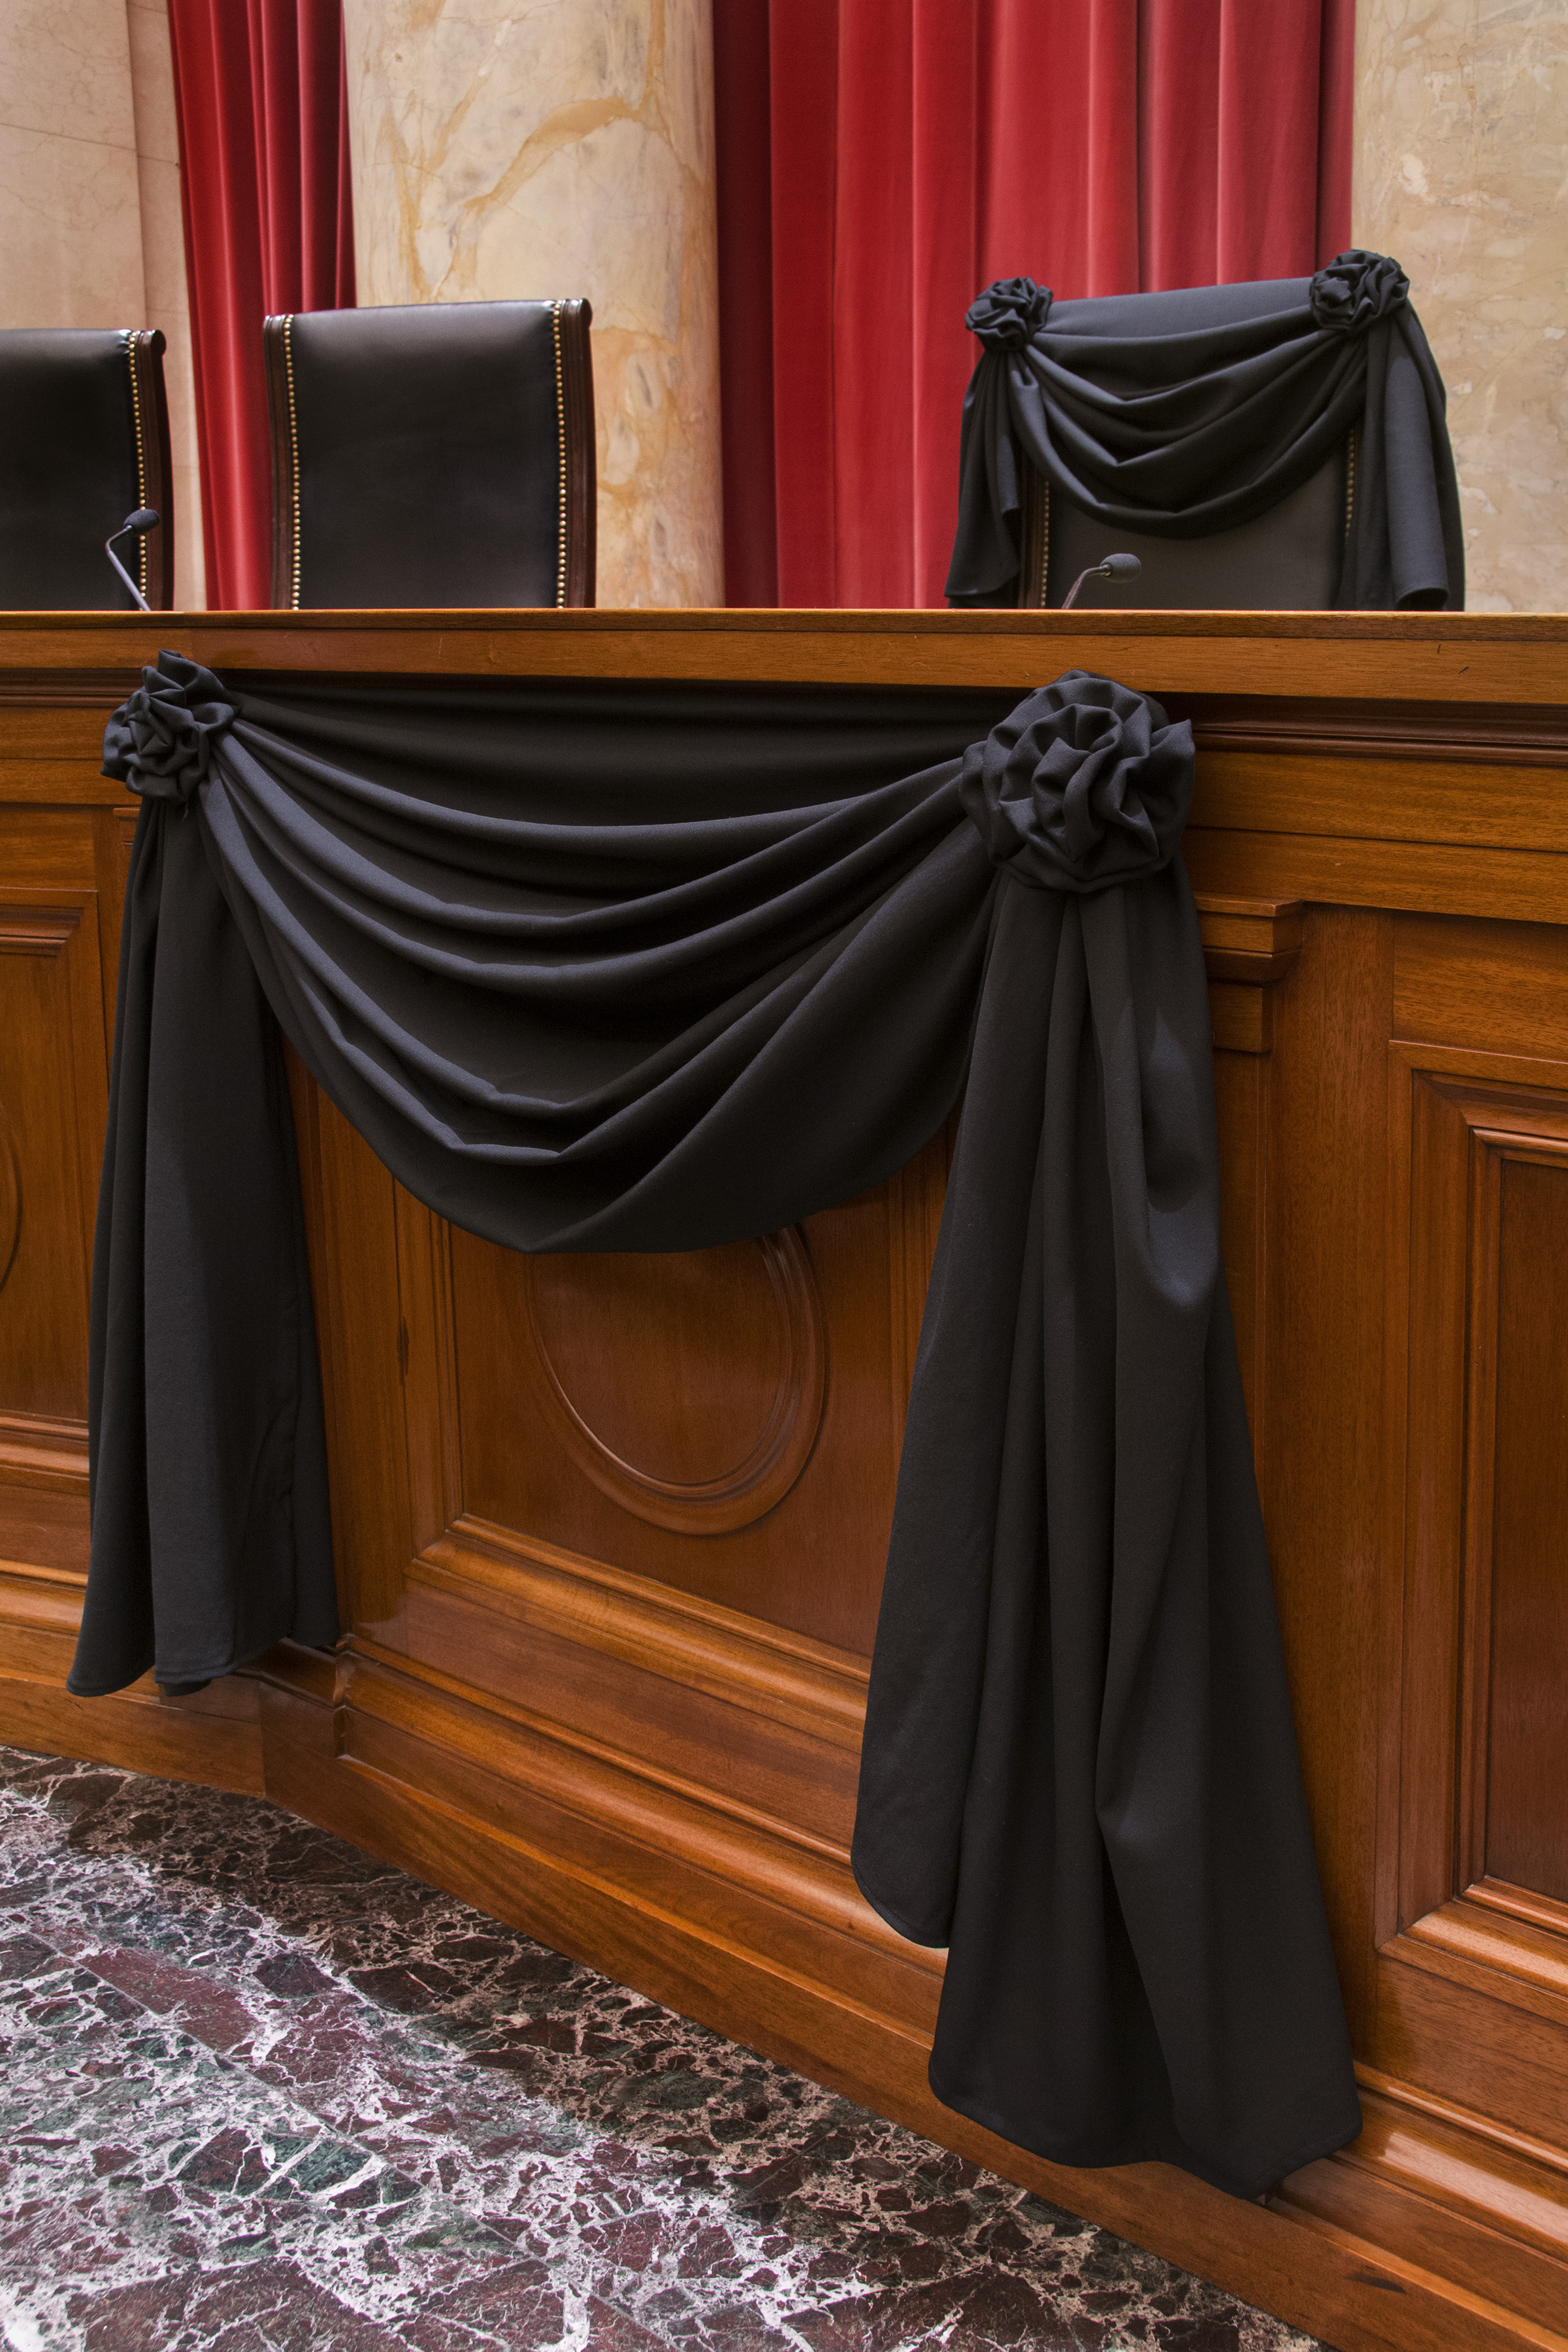 Associate Justice Antonin Scalia’s bench chair and the bench in front of his seat are draped in black in the Courtroom of the Supreme Court following his Feb. 13, 2016 death. (Franz Jantzen—Collection of the Supreme Court of the United States)